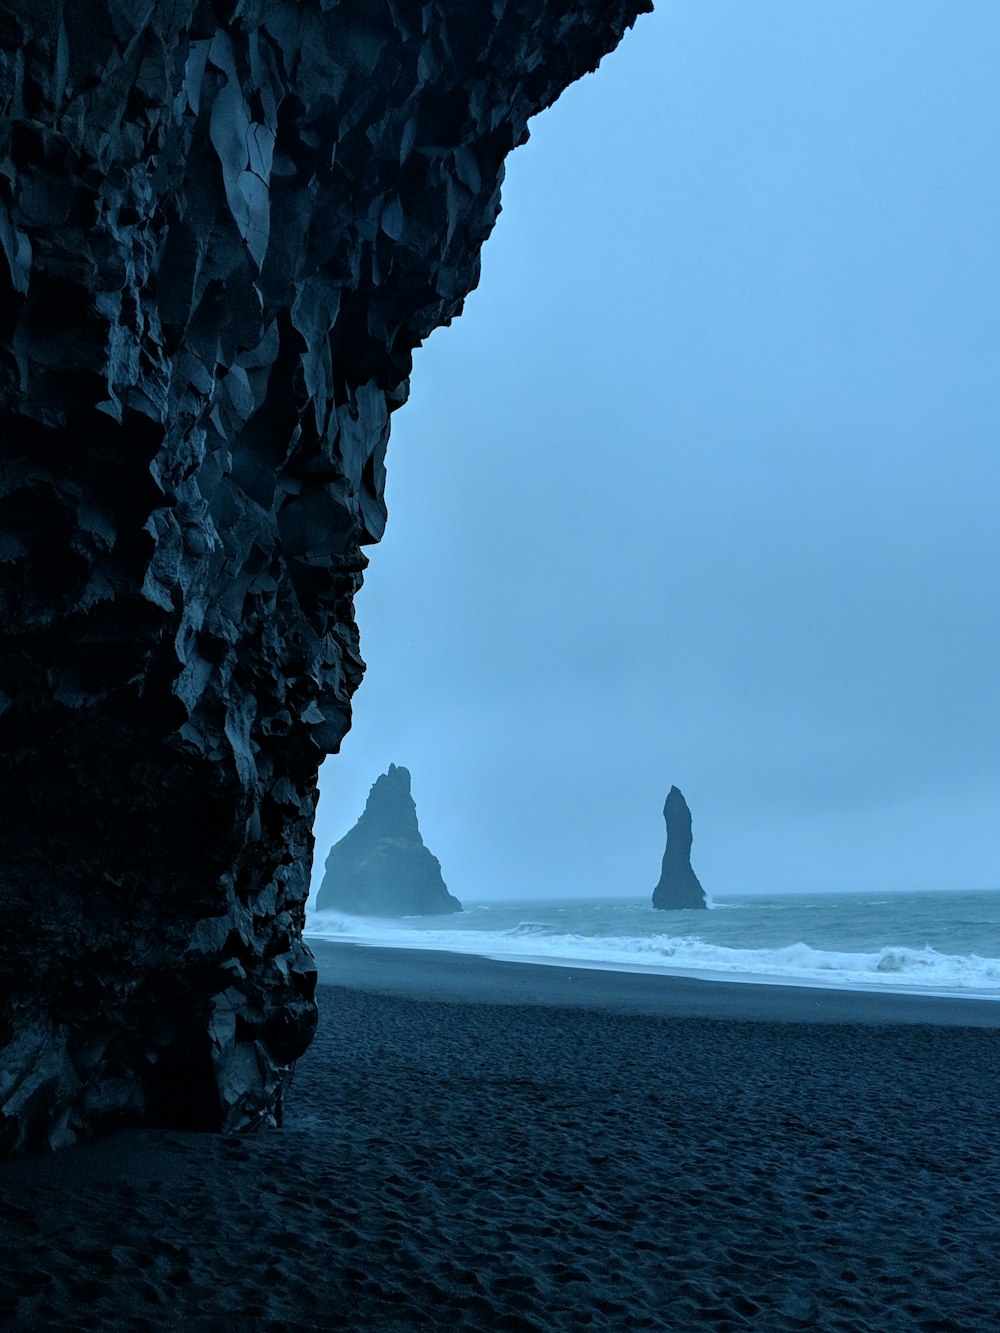 black rock formations in beach